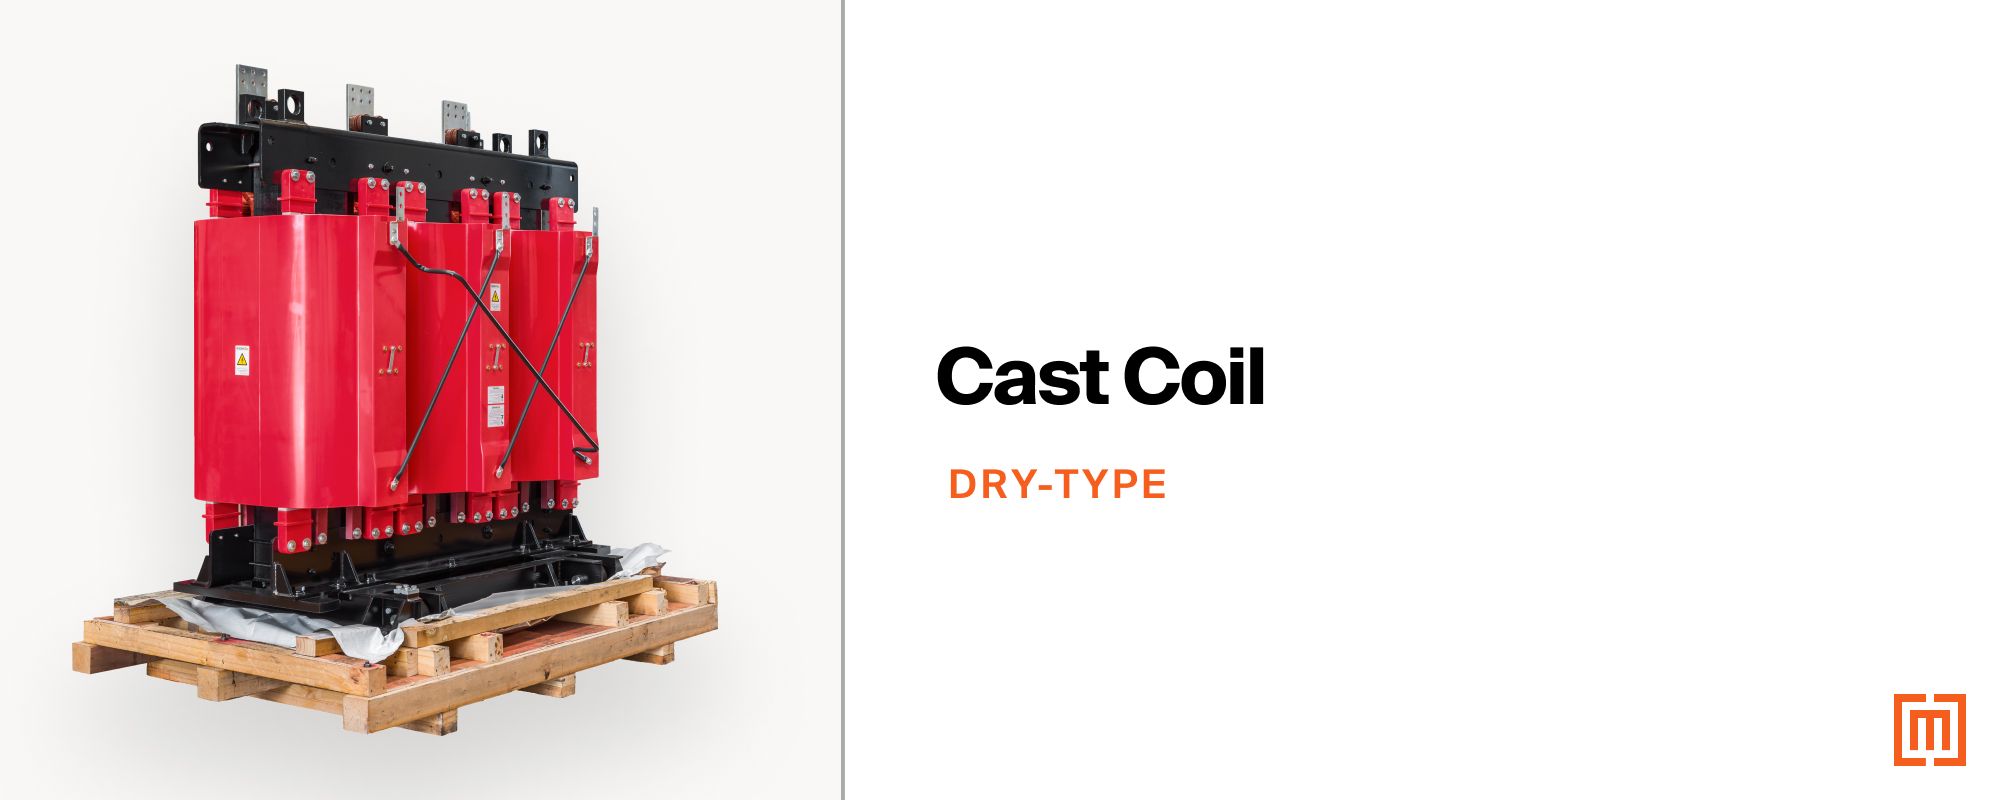 A dry type cast coil transformer